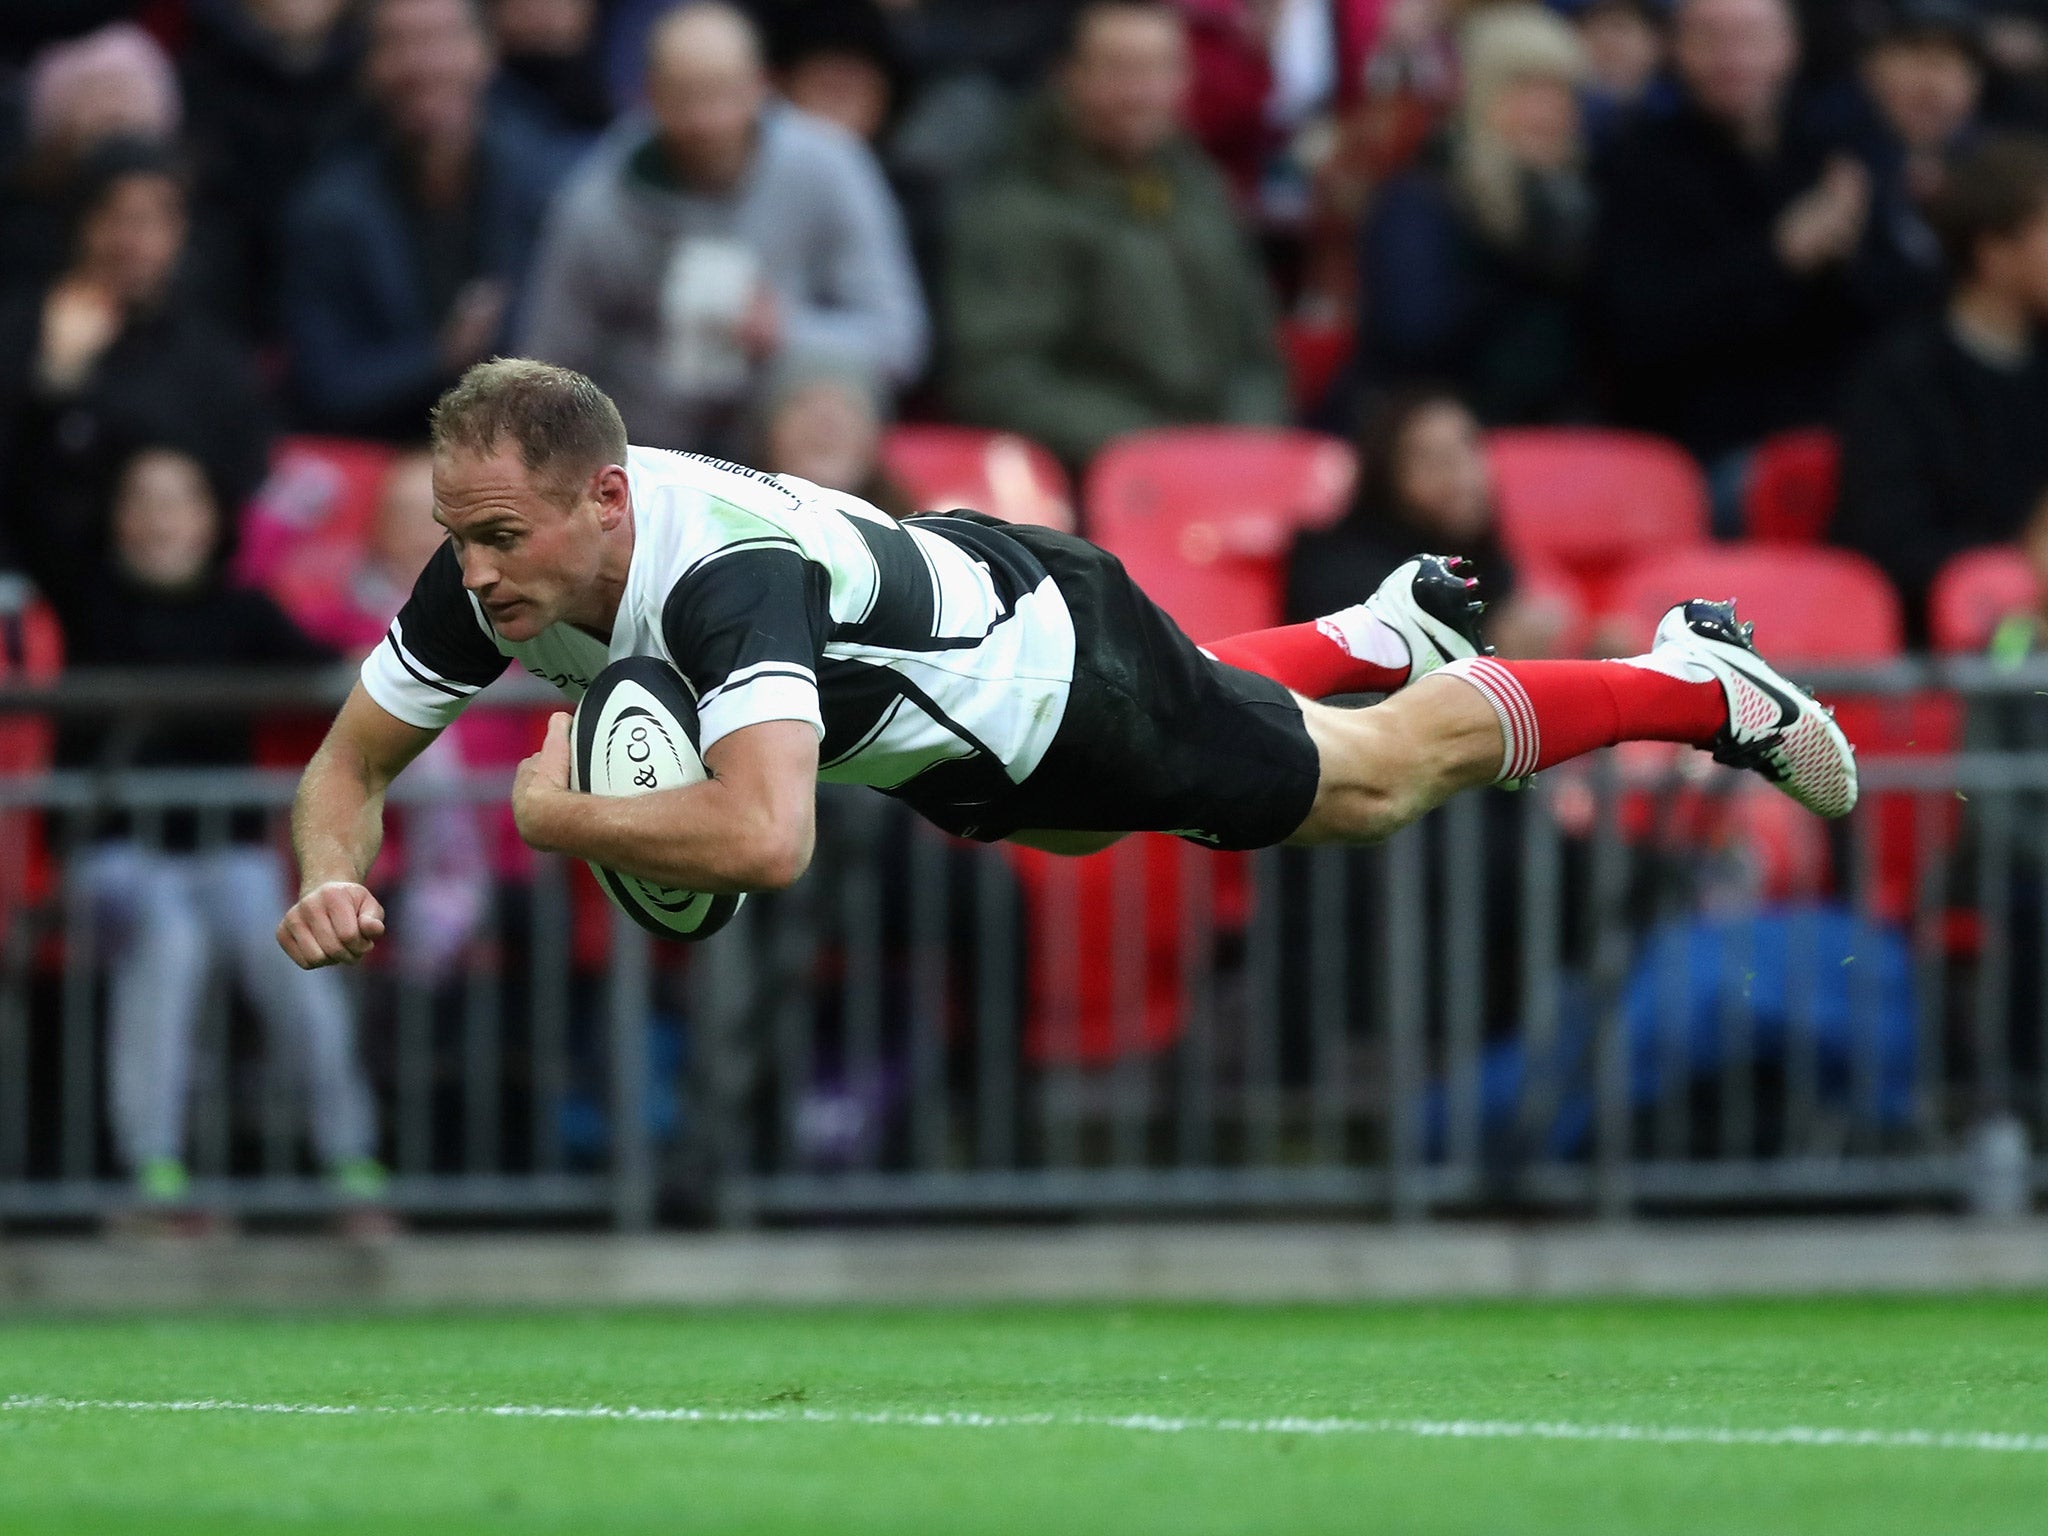 Andy Ellis dives over to score a try for the Barbarians